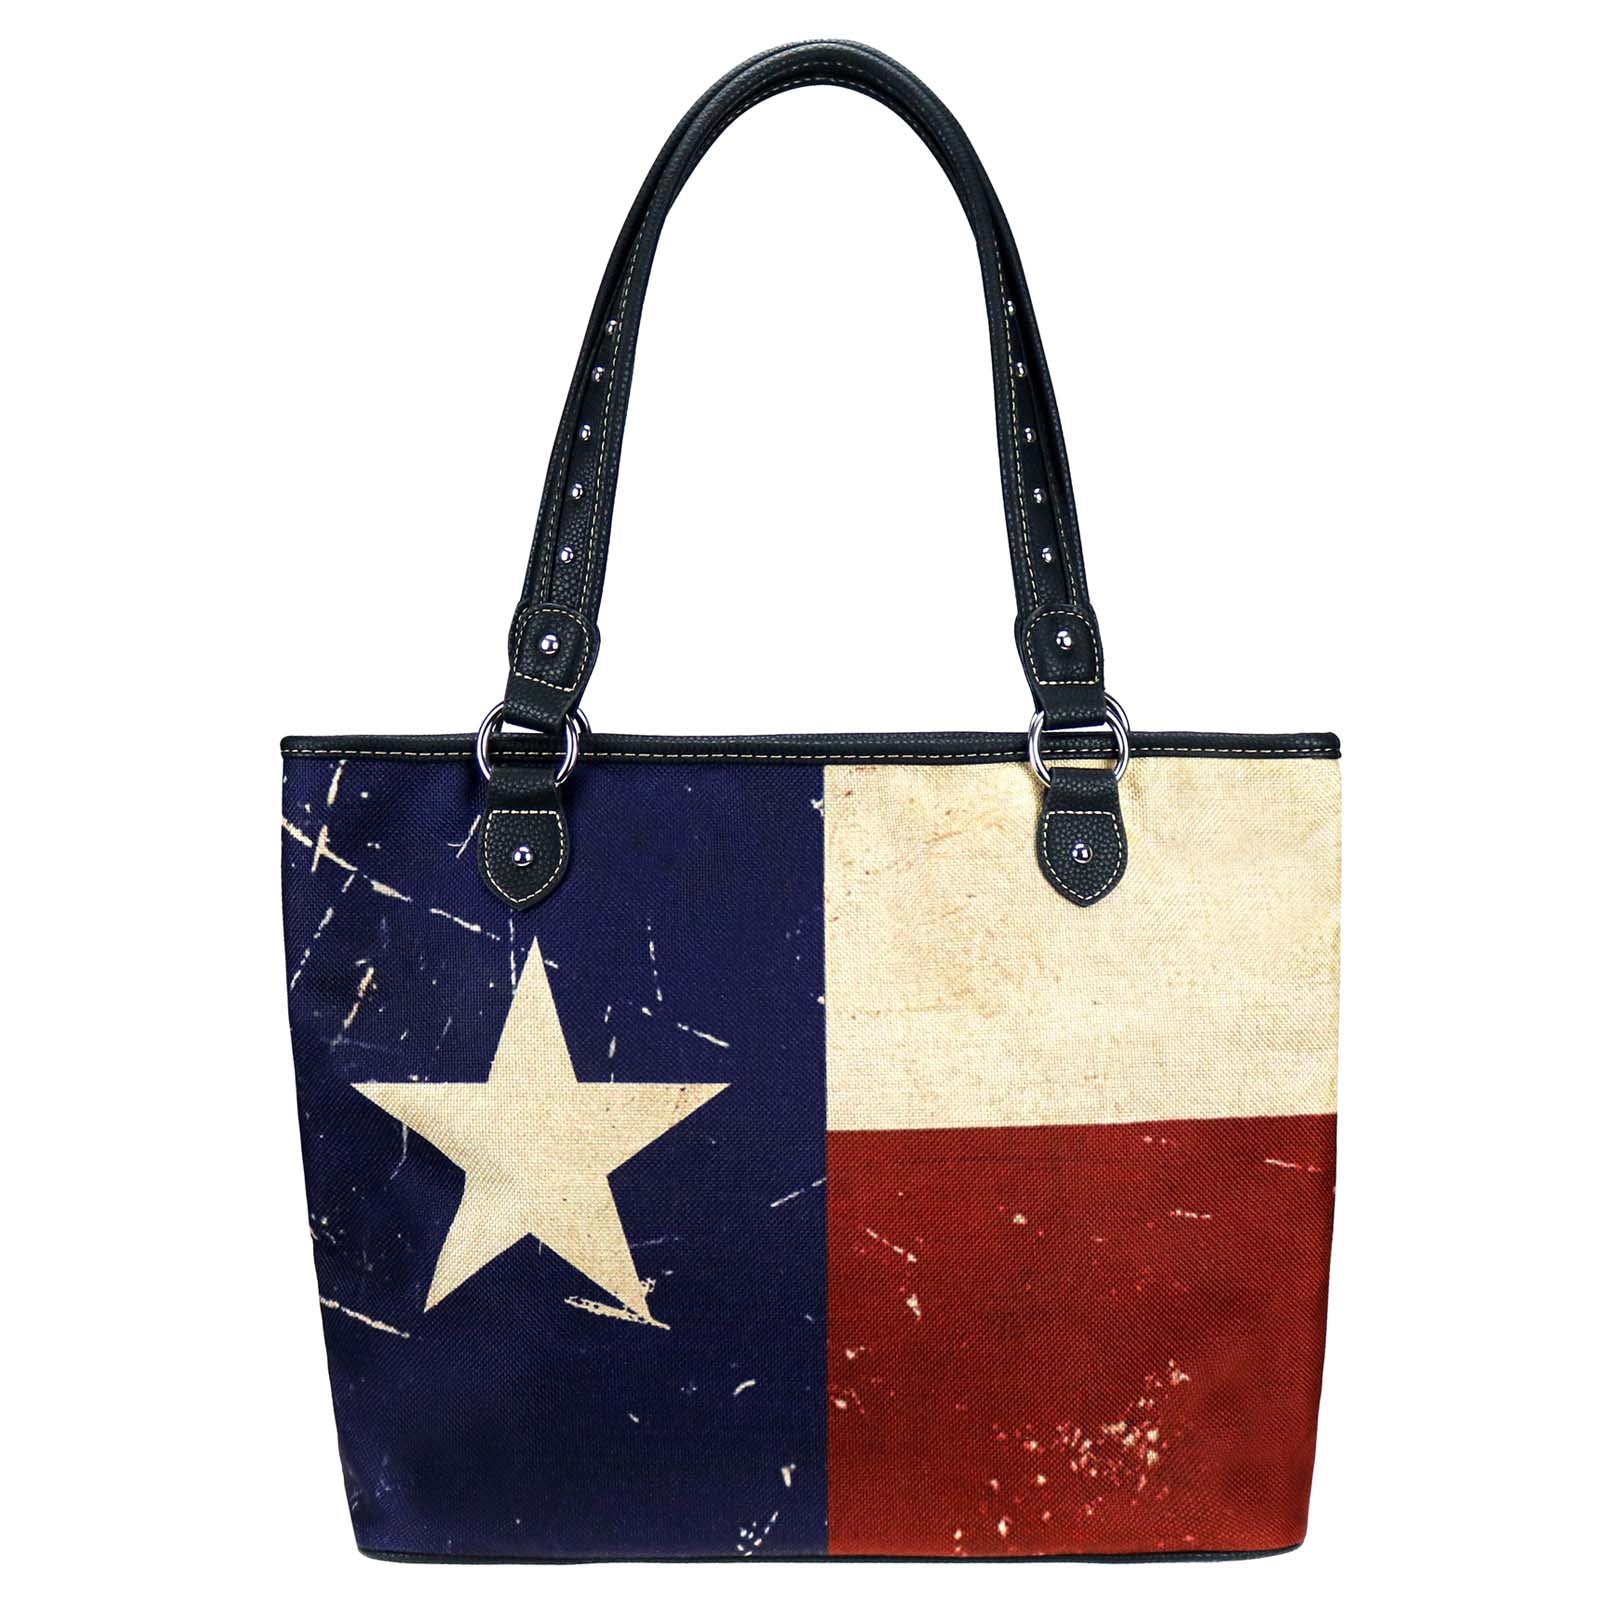 Don't mess with Texas Camino 35 Carryall Tote - Texas Highways